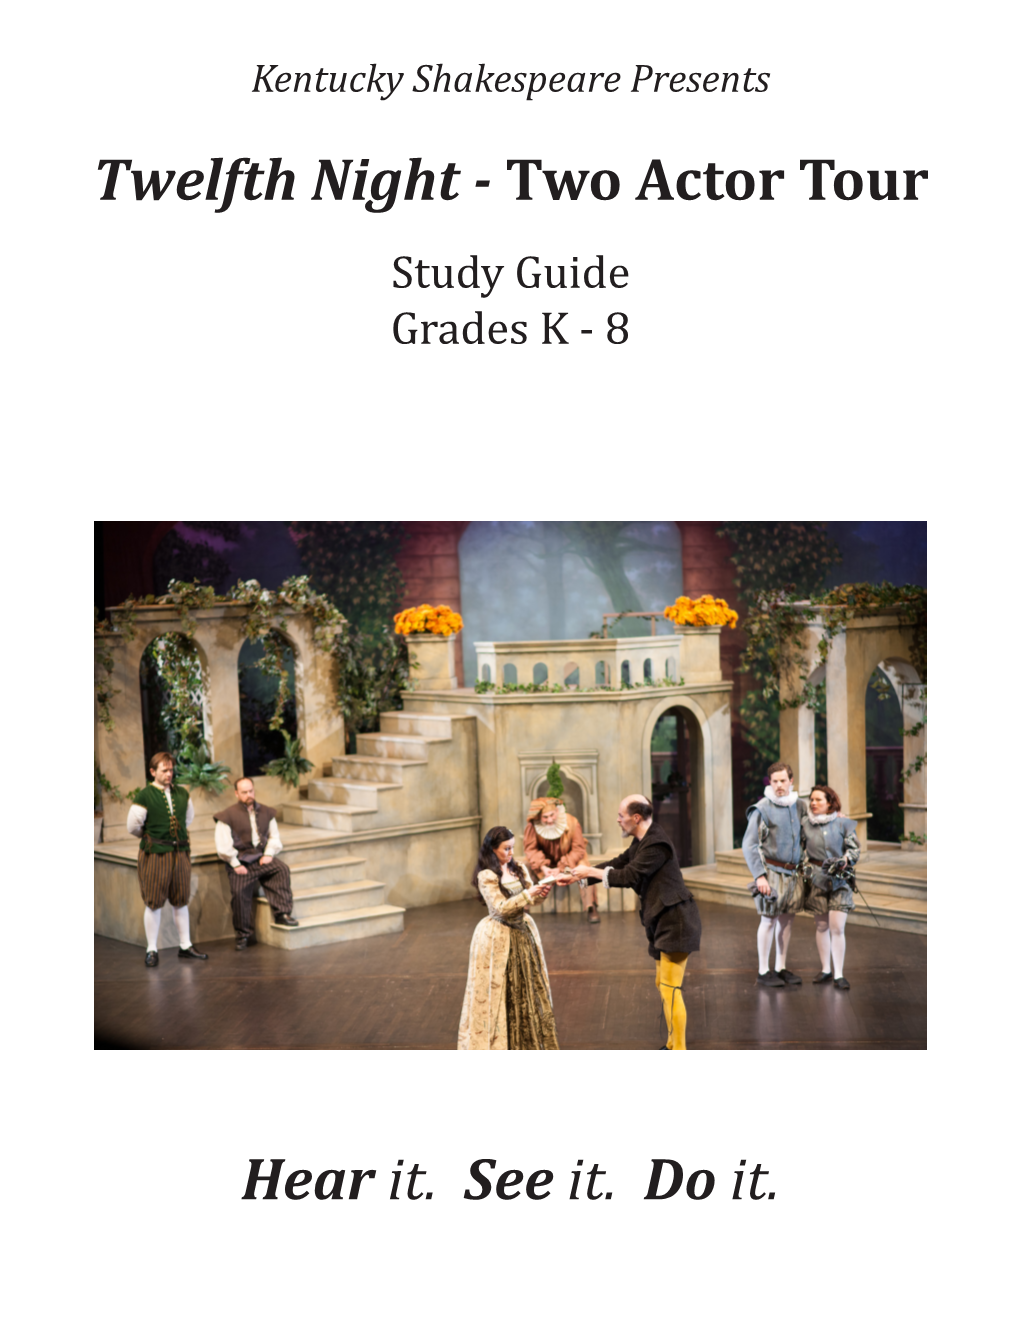 Twelfth Night - Two Actor Tour Study Guide Grades K - 8